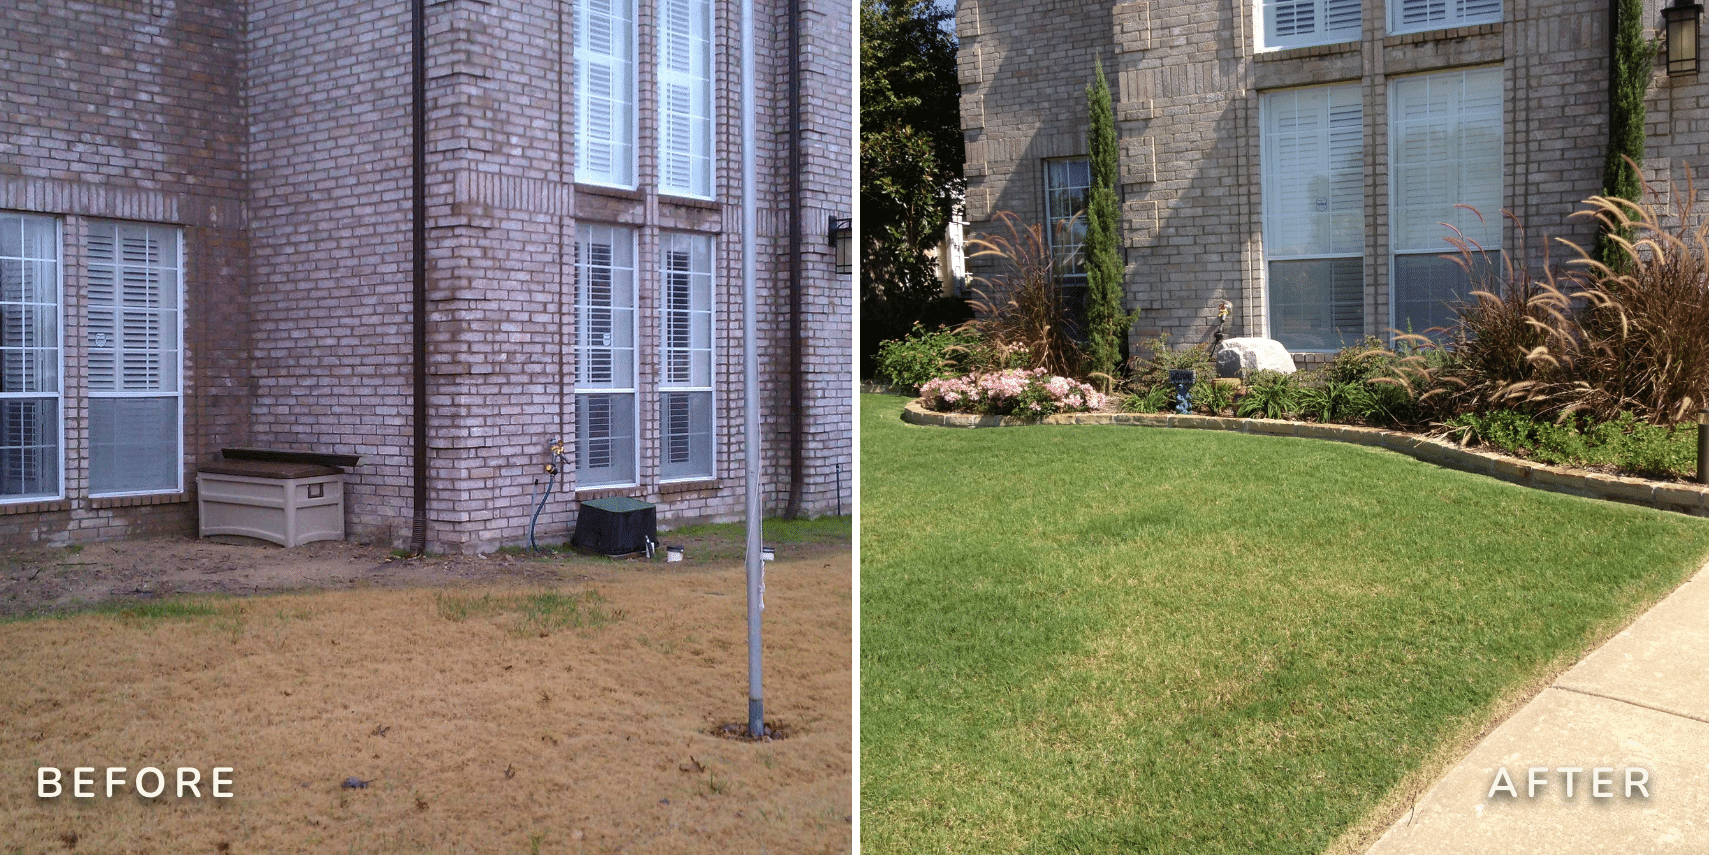 Before and After Image of Yard with no plants and a flagpole before and many flowers and plants after